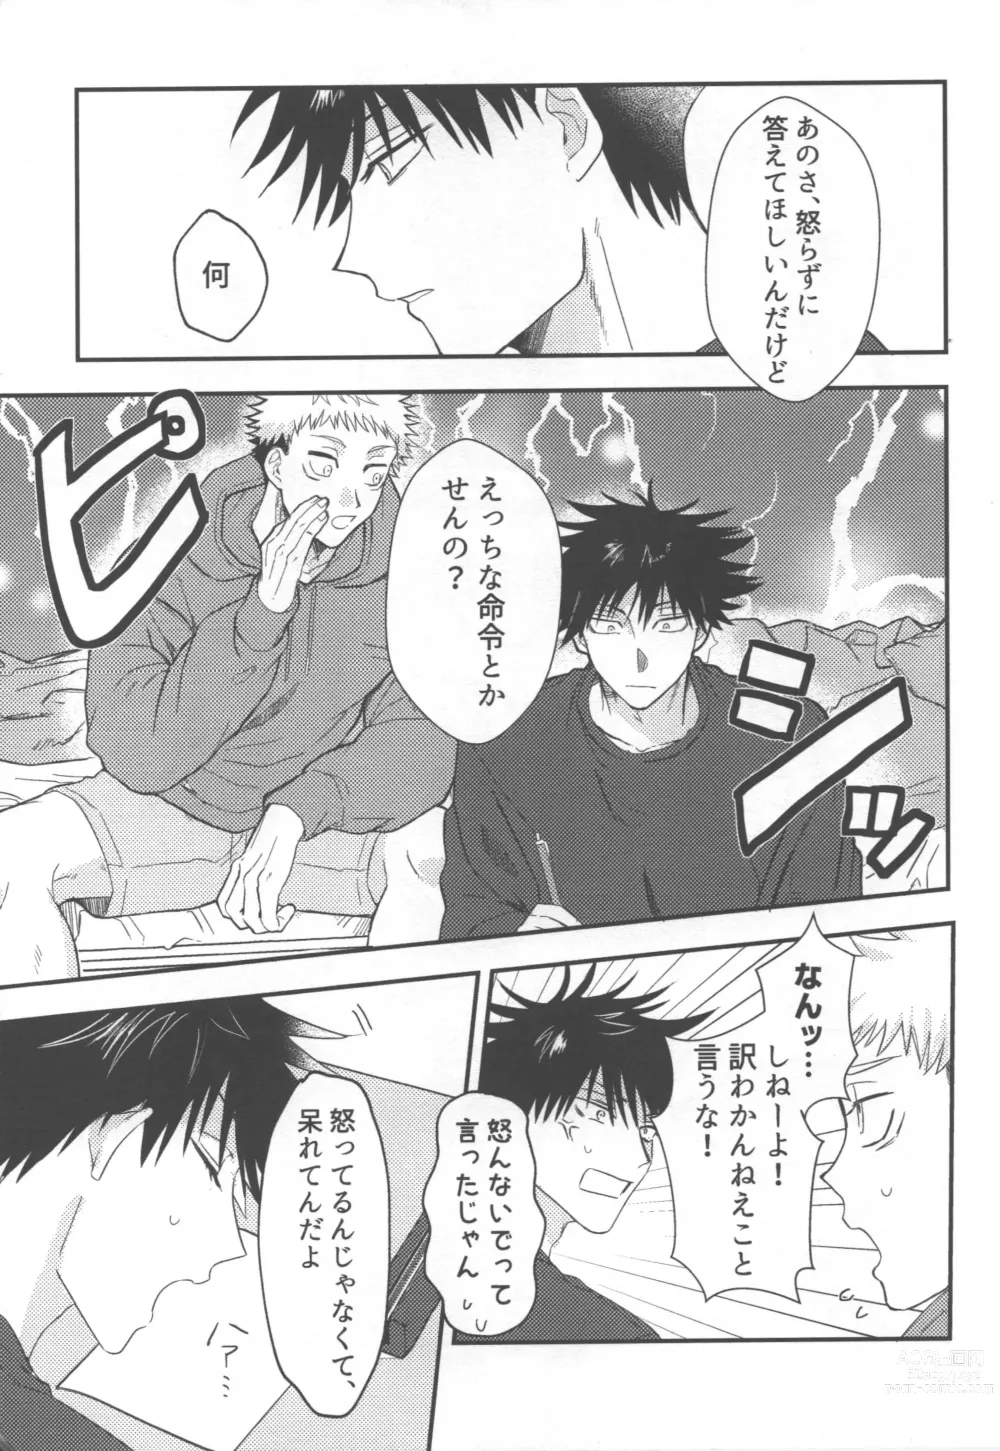 Page 10 of doujinshi Dont Look at ME Like That.